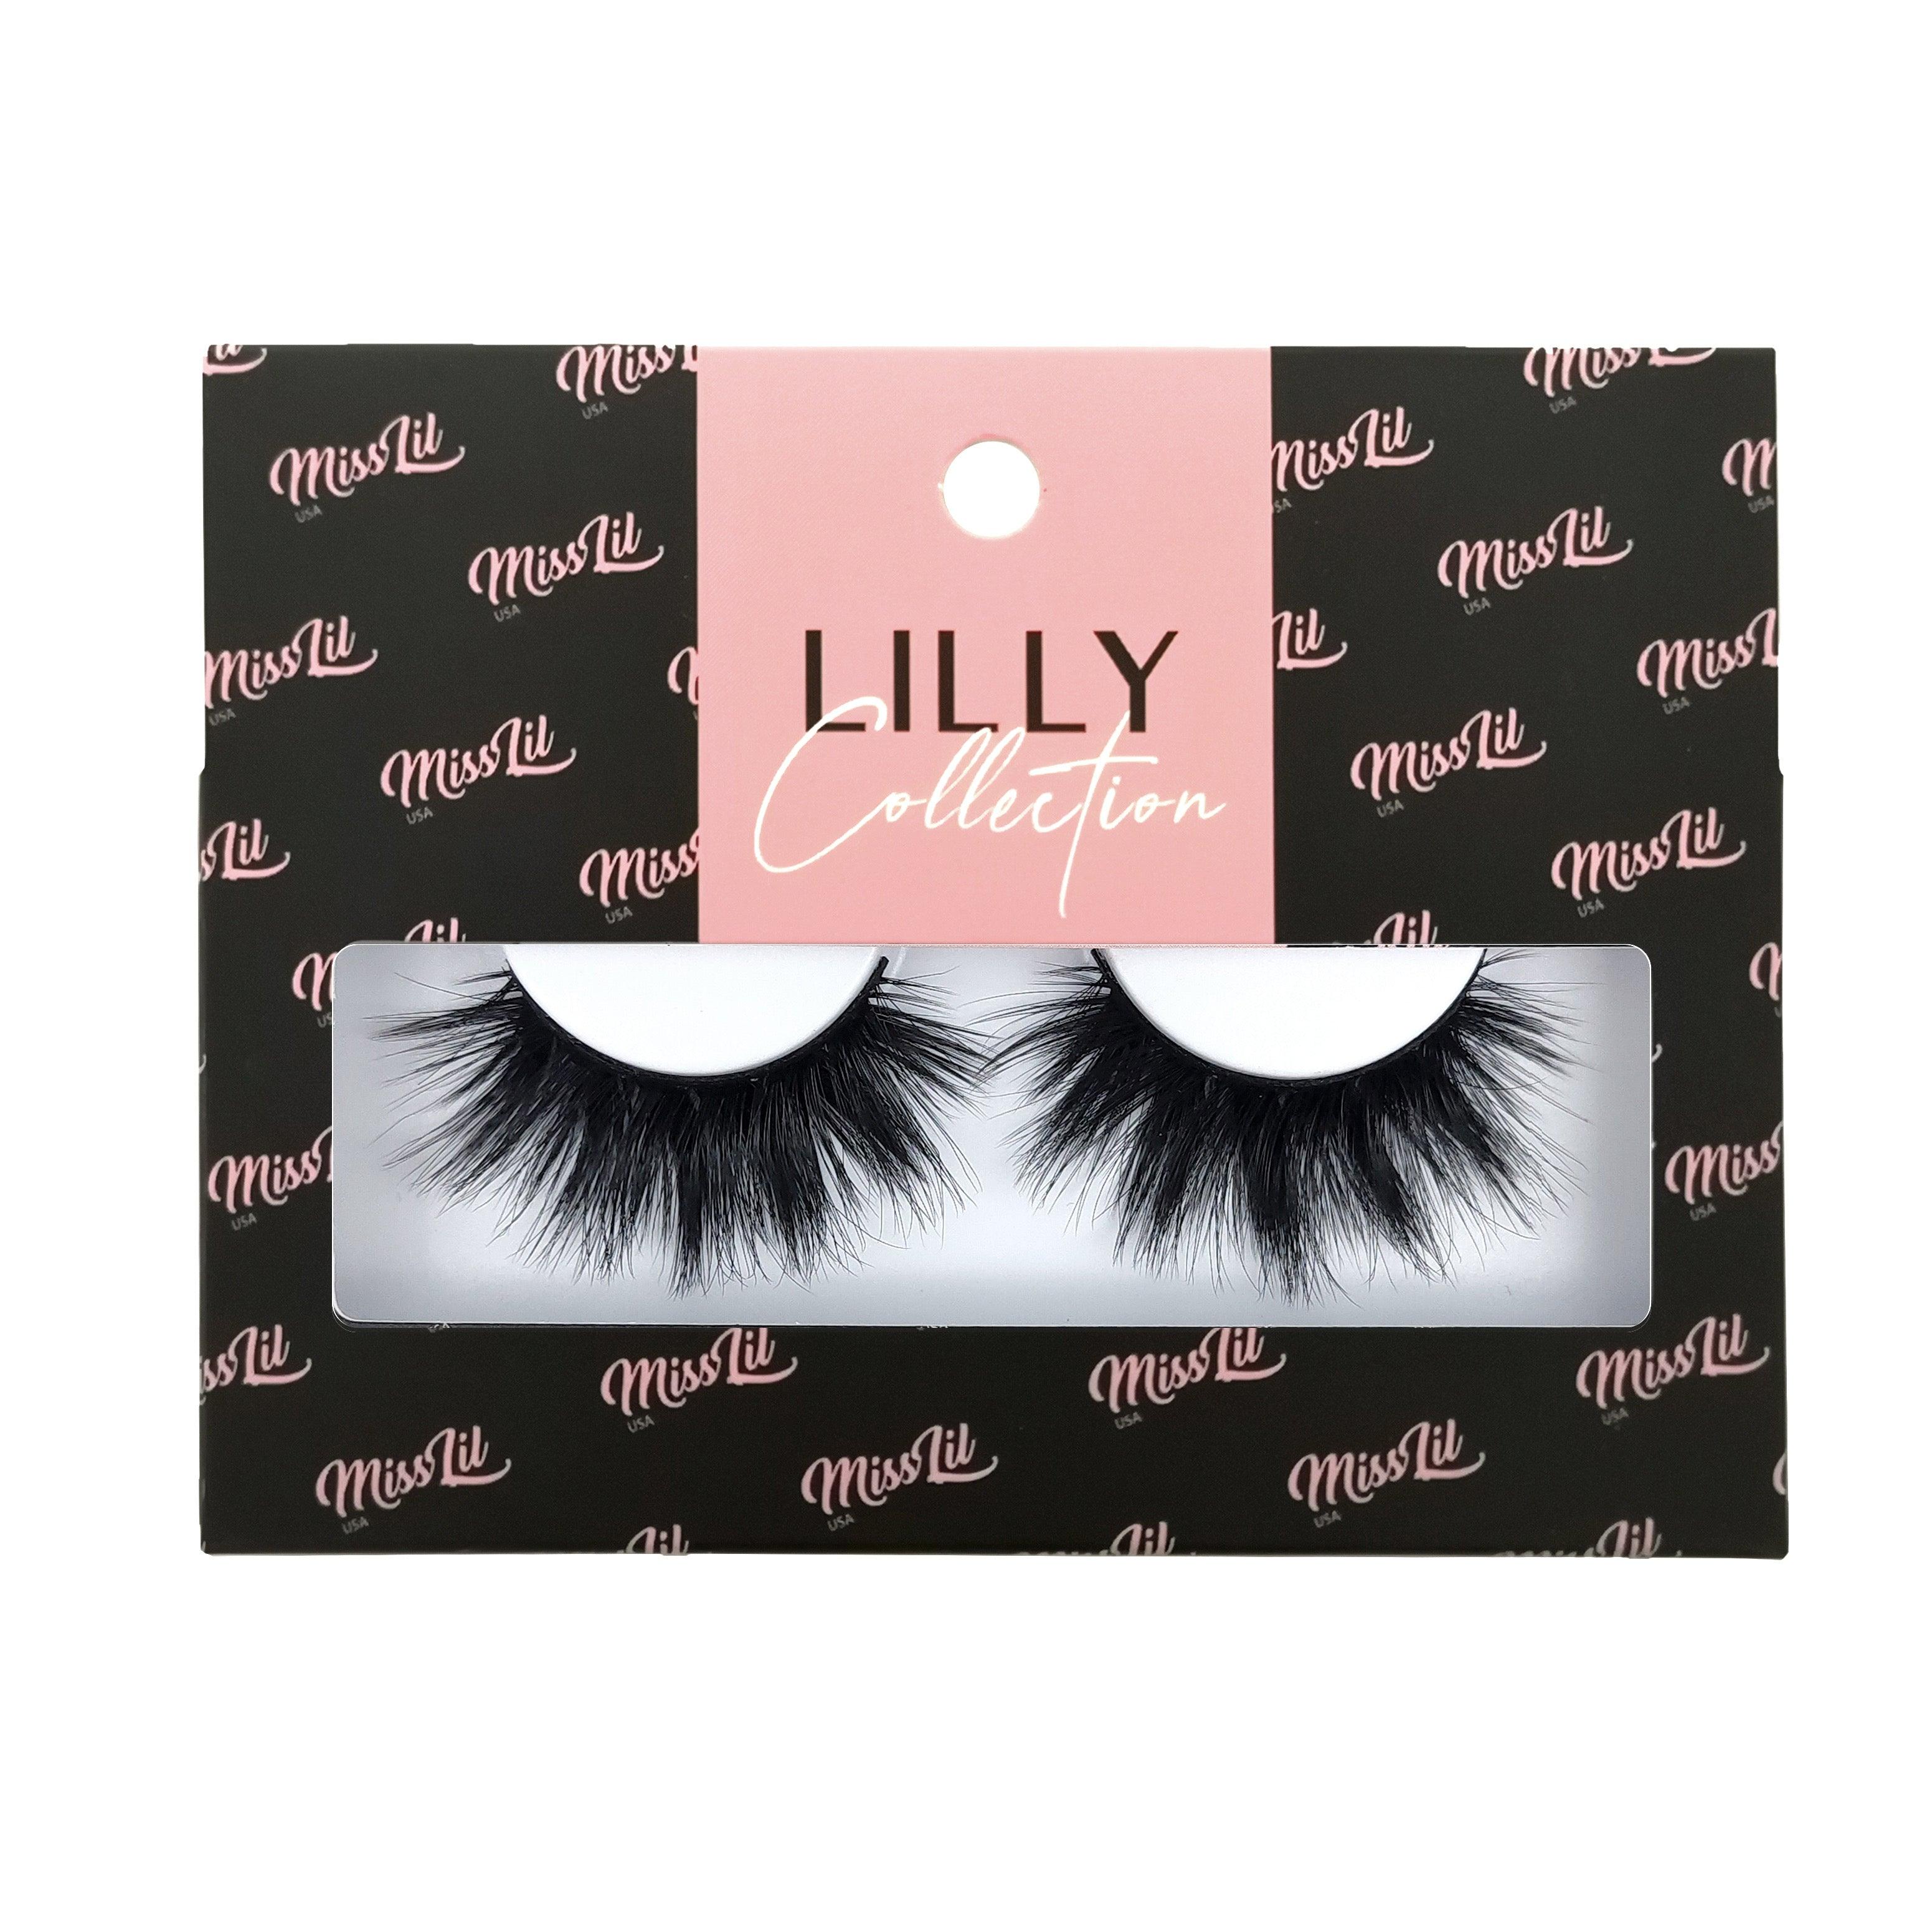 1-Pair Lashes-Lilly Collection #9 (Pack of 12) - Miss Lil USA Wholesale